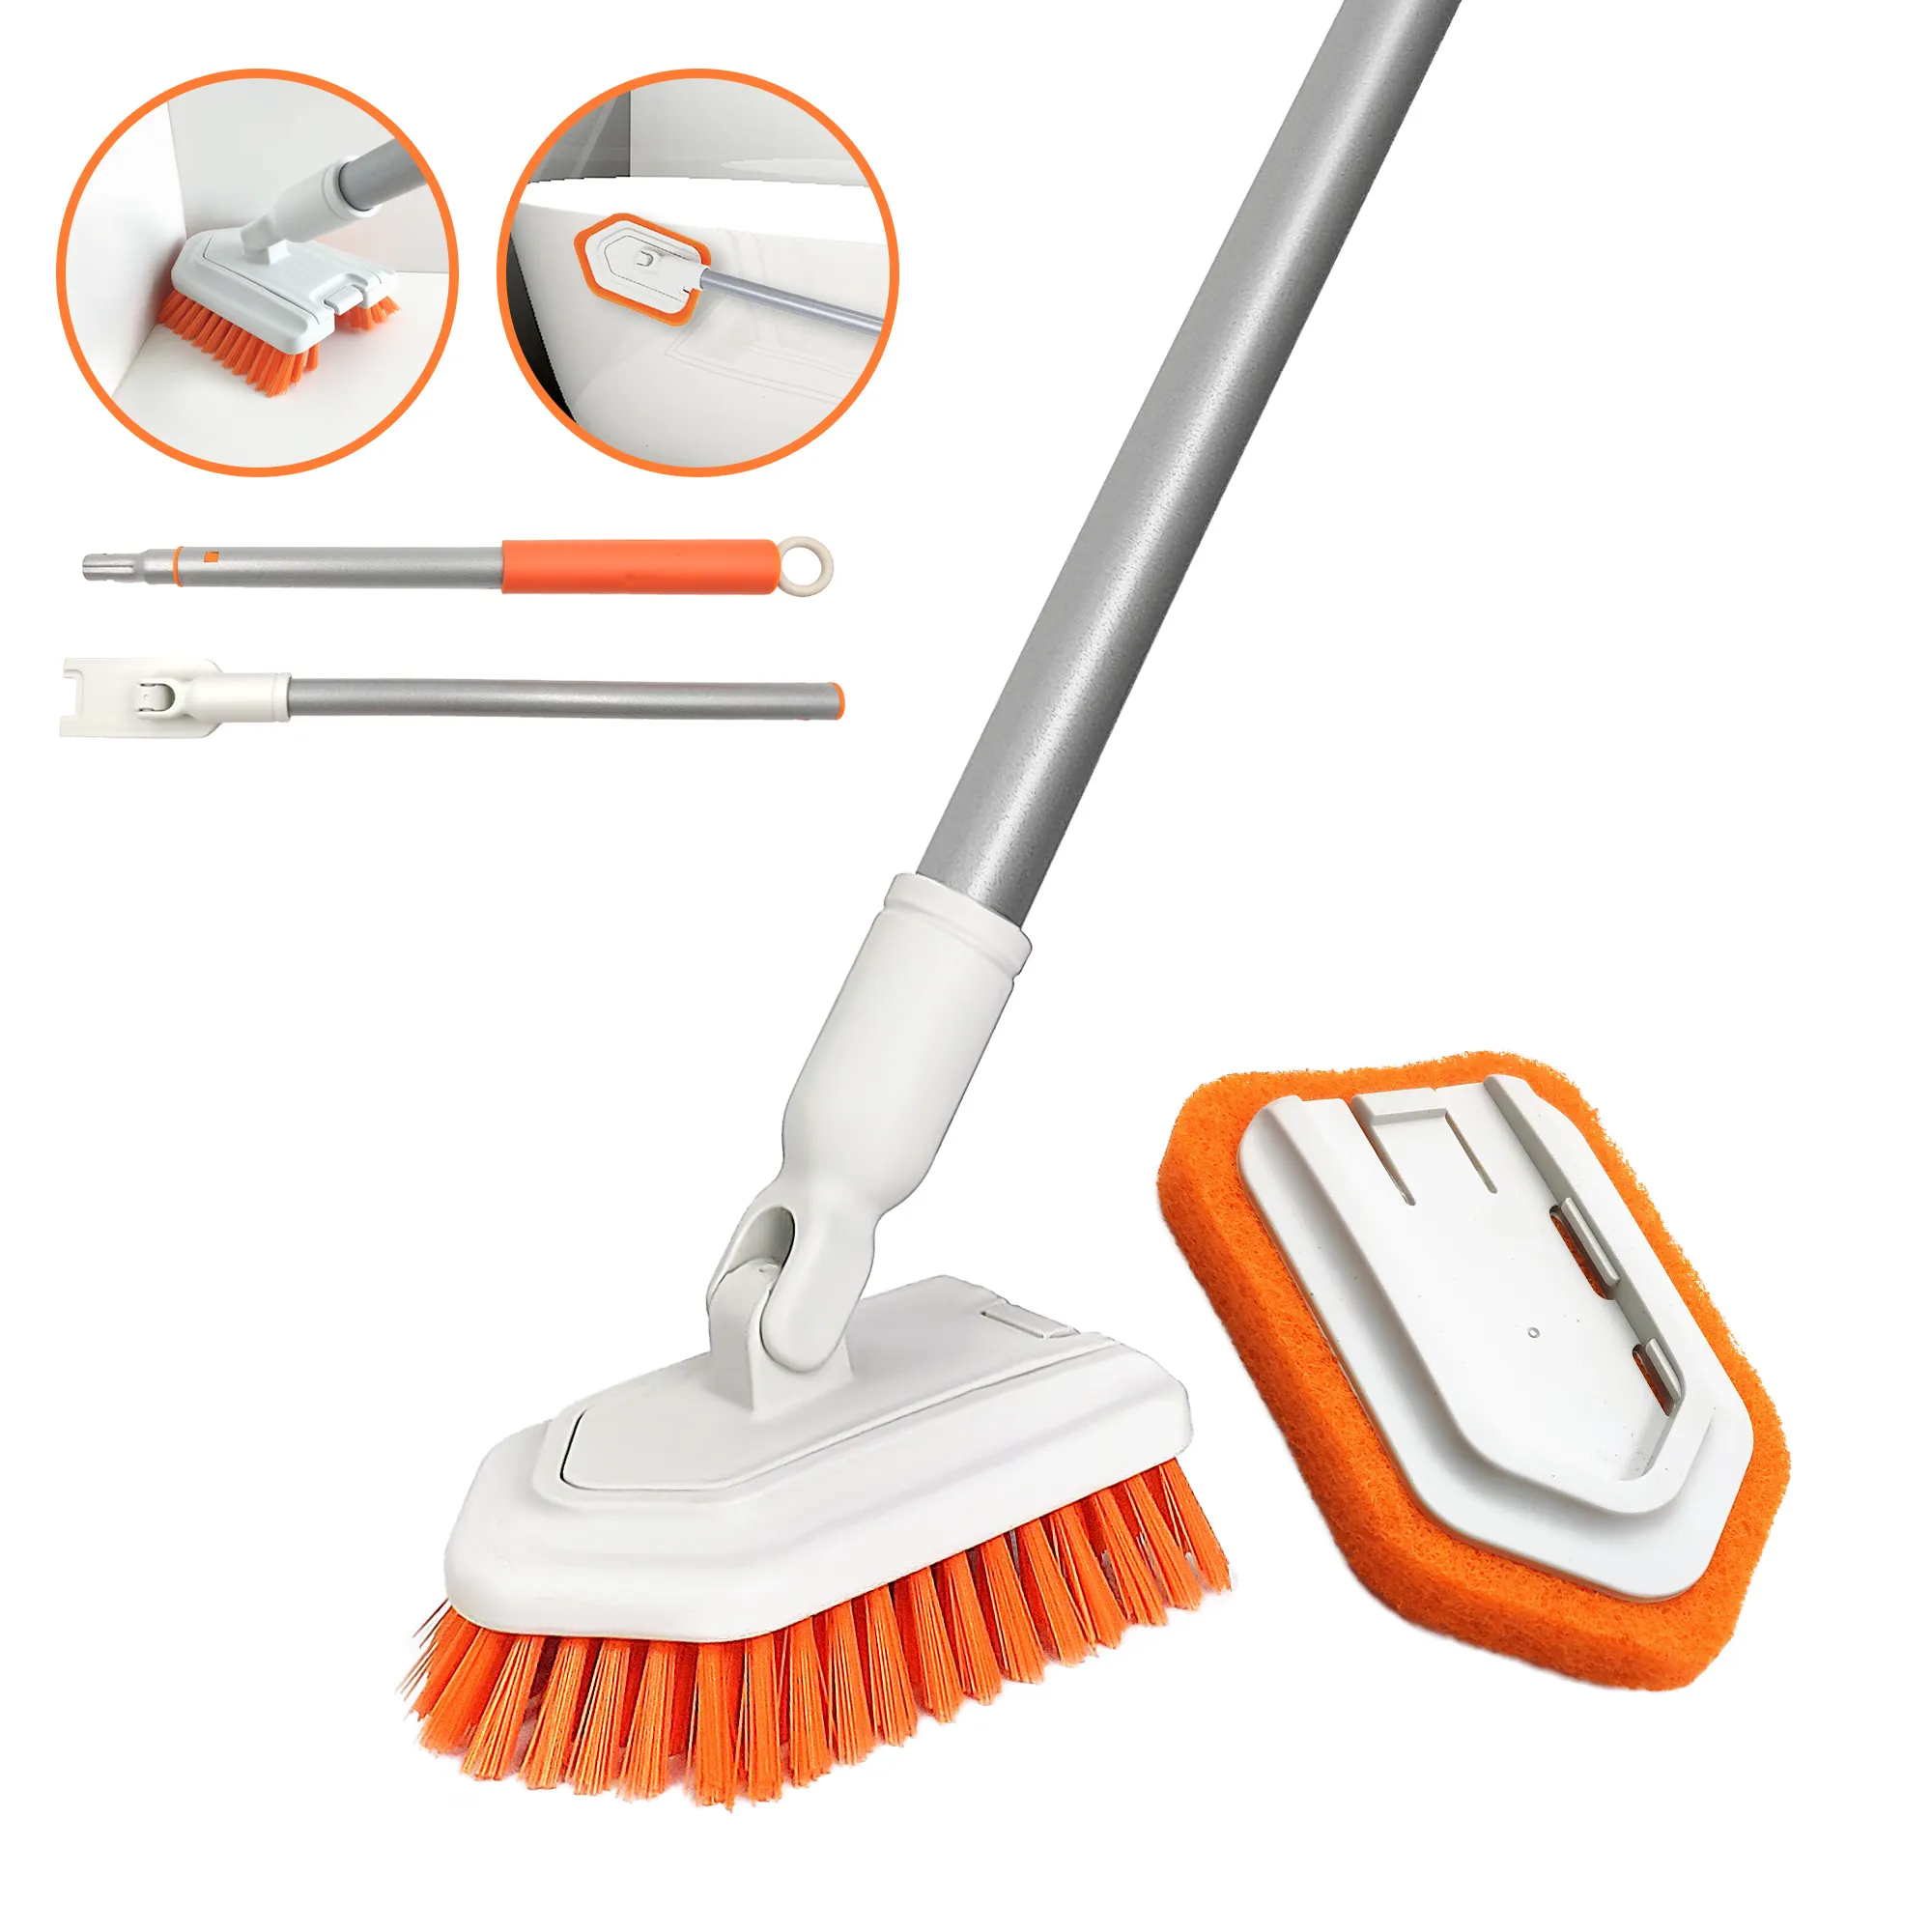 Household Cleaning Tools Bathroom Cleaning Tile Cleaning Scrubbers Sponge and PP Brush Head Brush